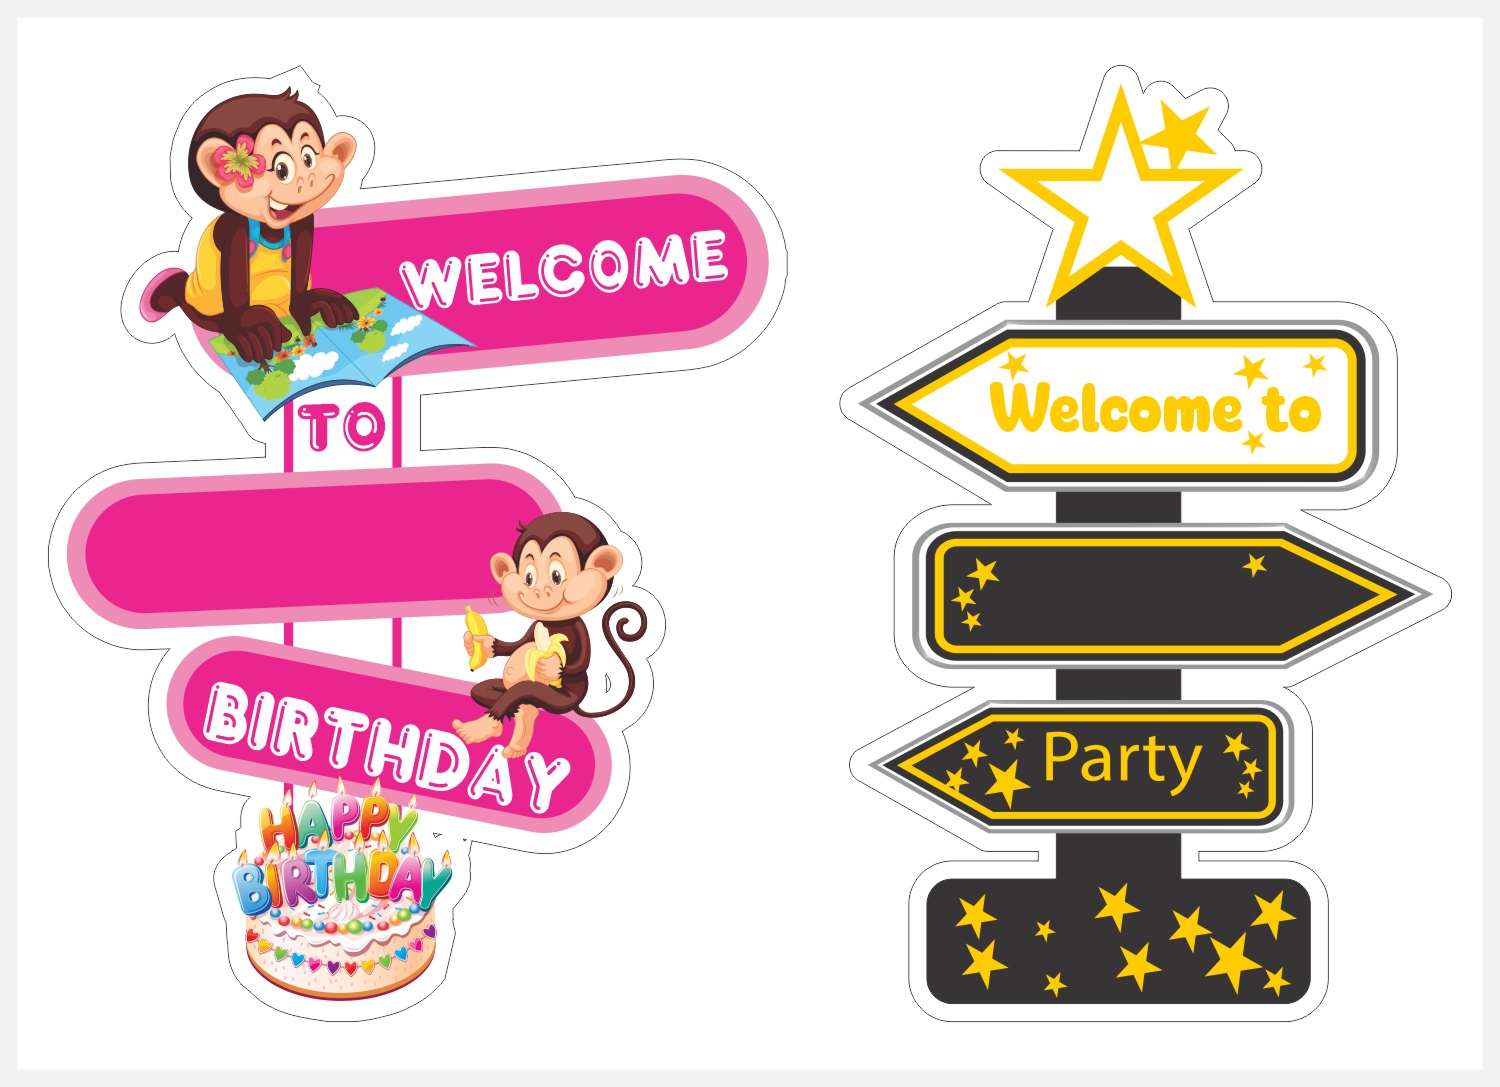 Welcome to birthday